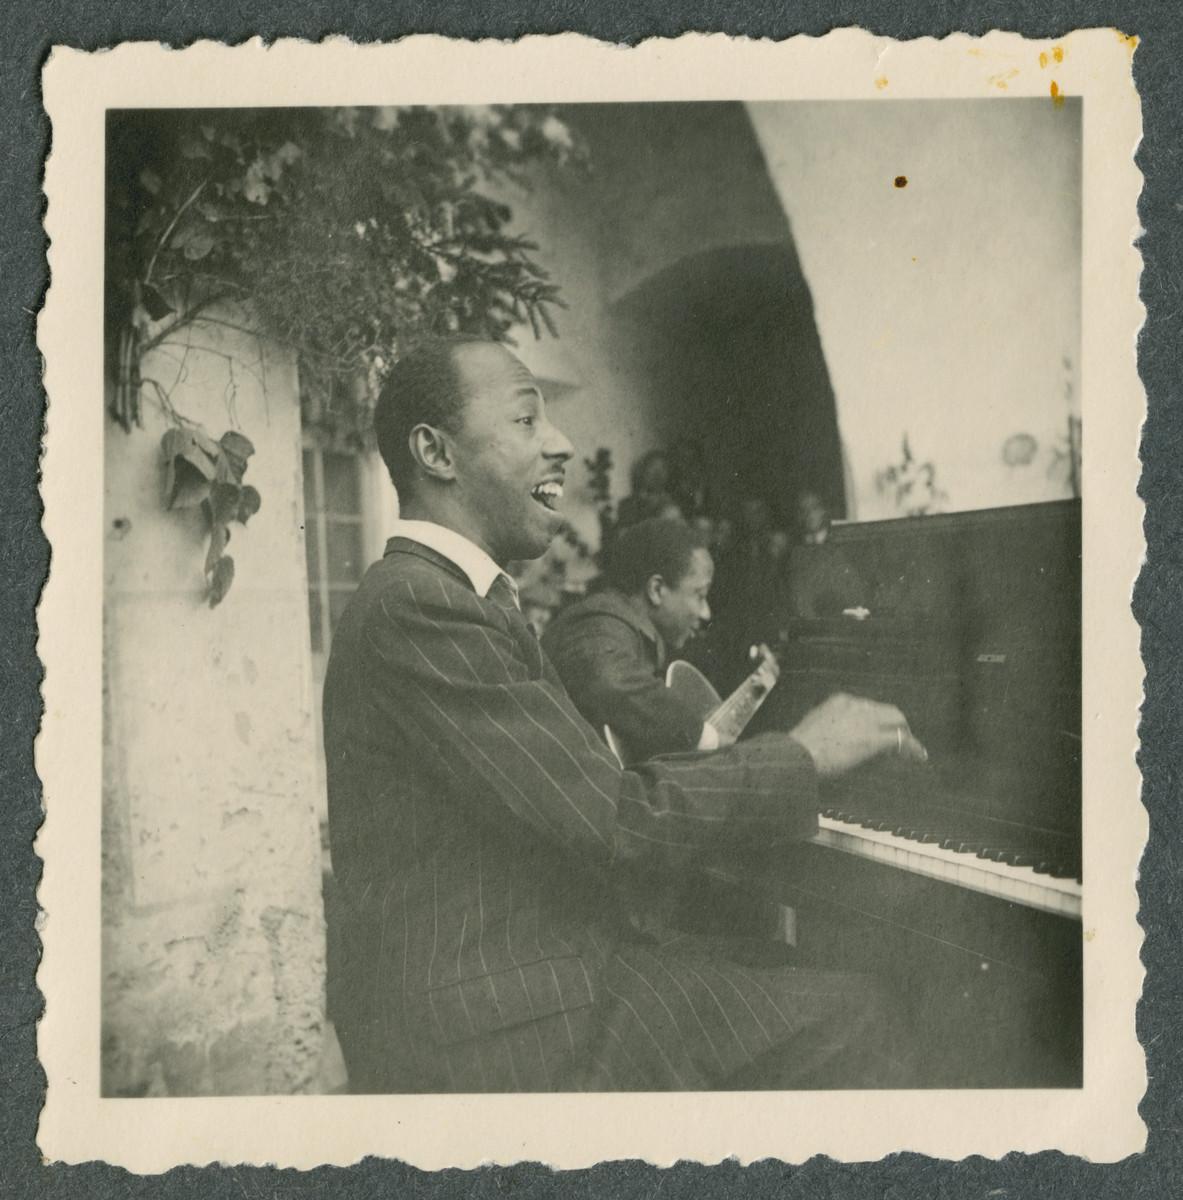 Freddy Johnson, an African-American jazz musician who was interned in Tittmoning from January 1942 until February 1944, plays the piano.